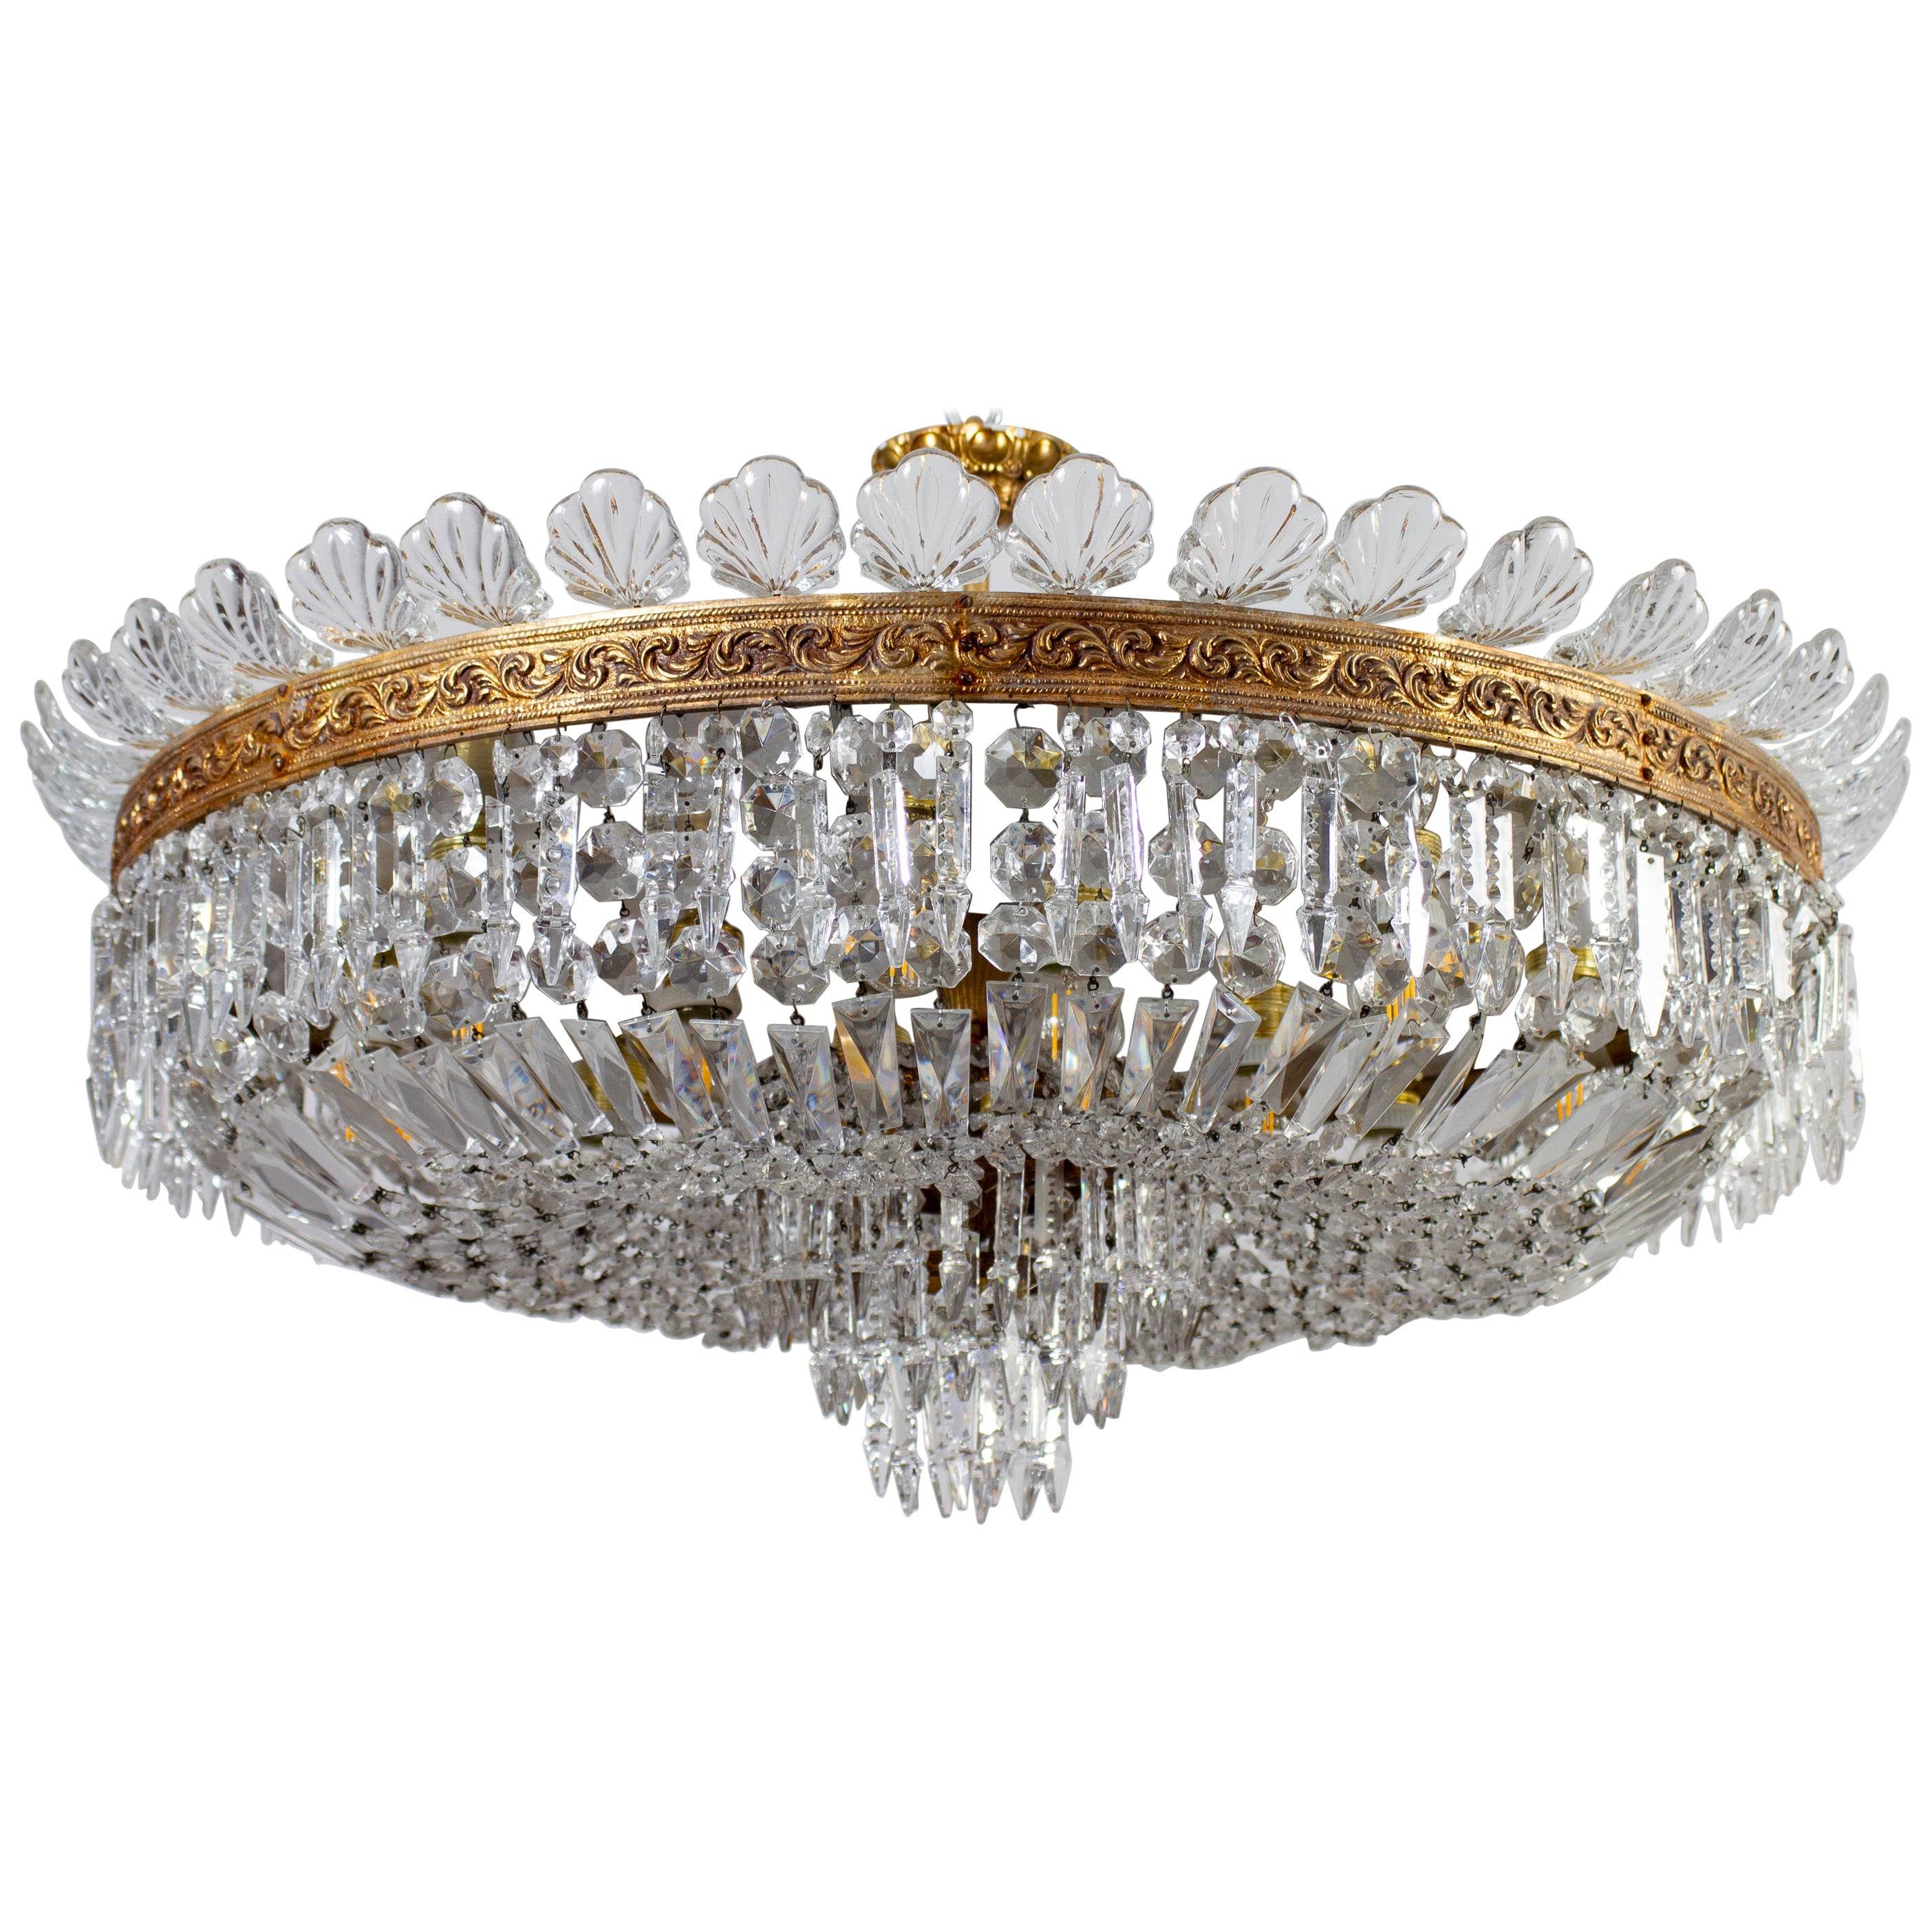 Sumptuous Crystal and Brass Chandelier, Italy, 1940 For Sale